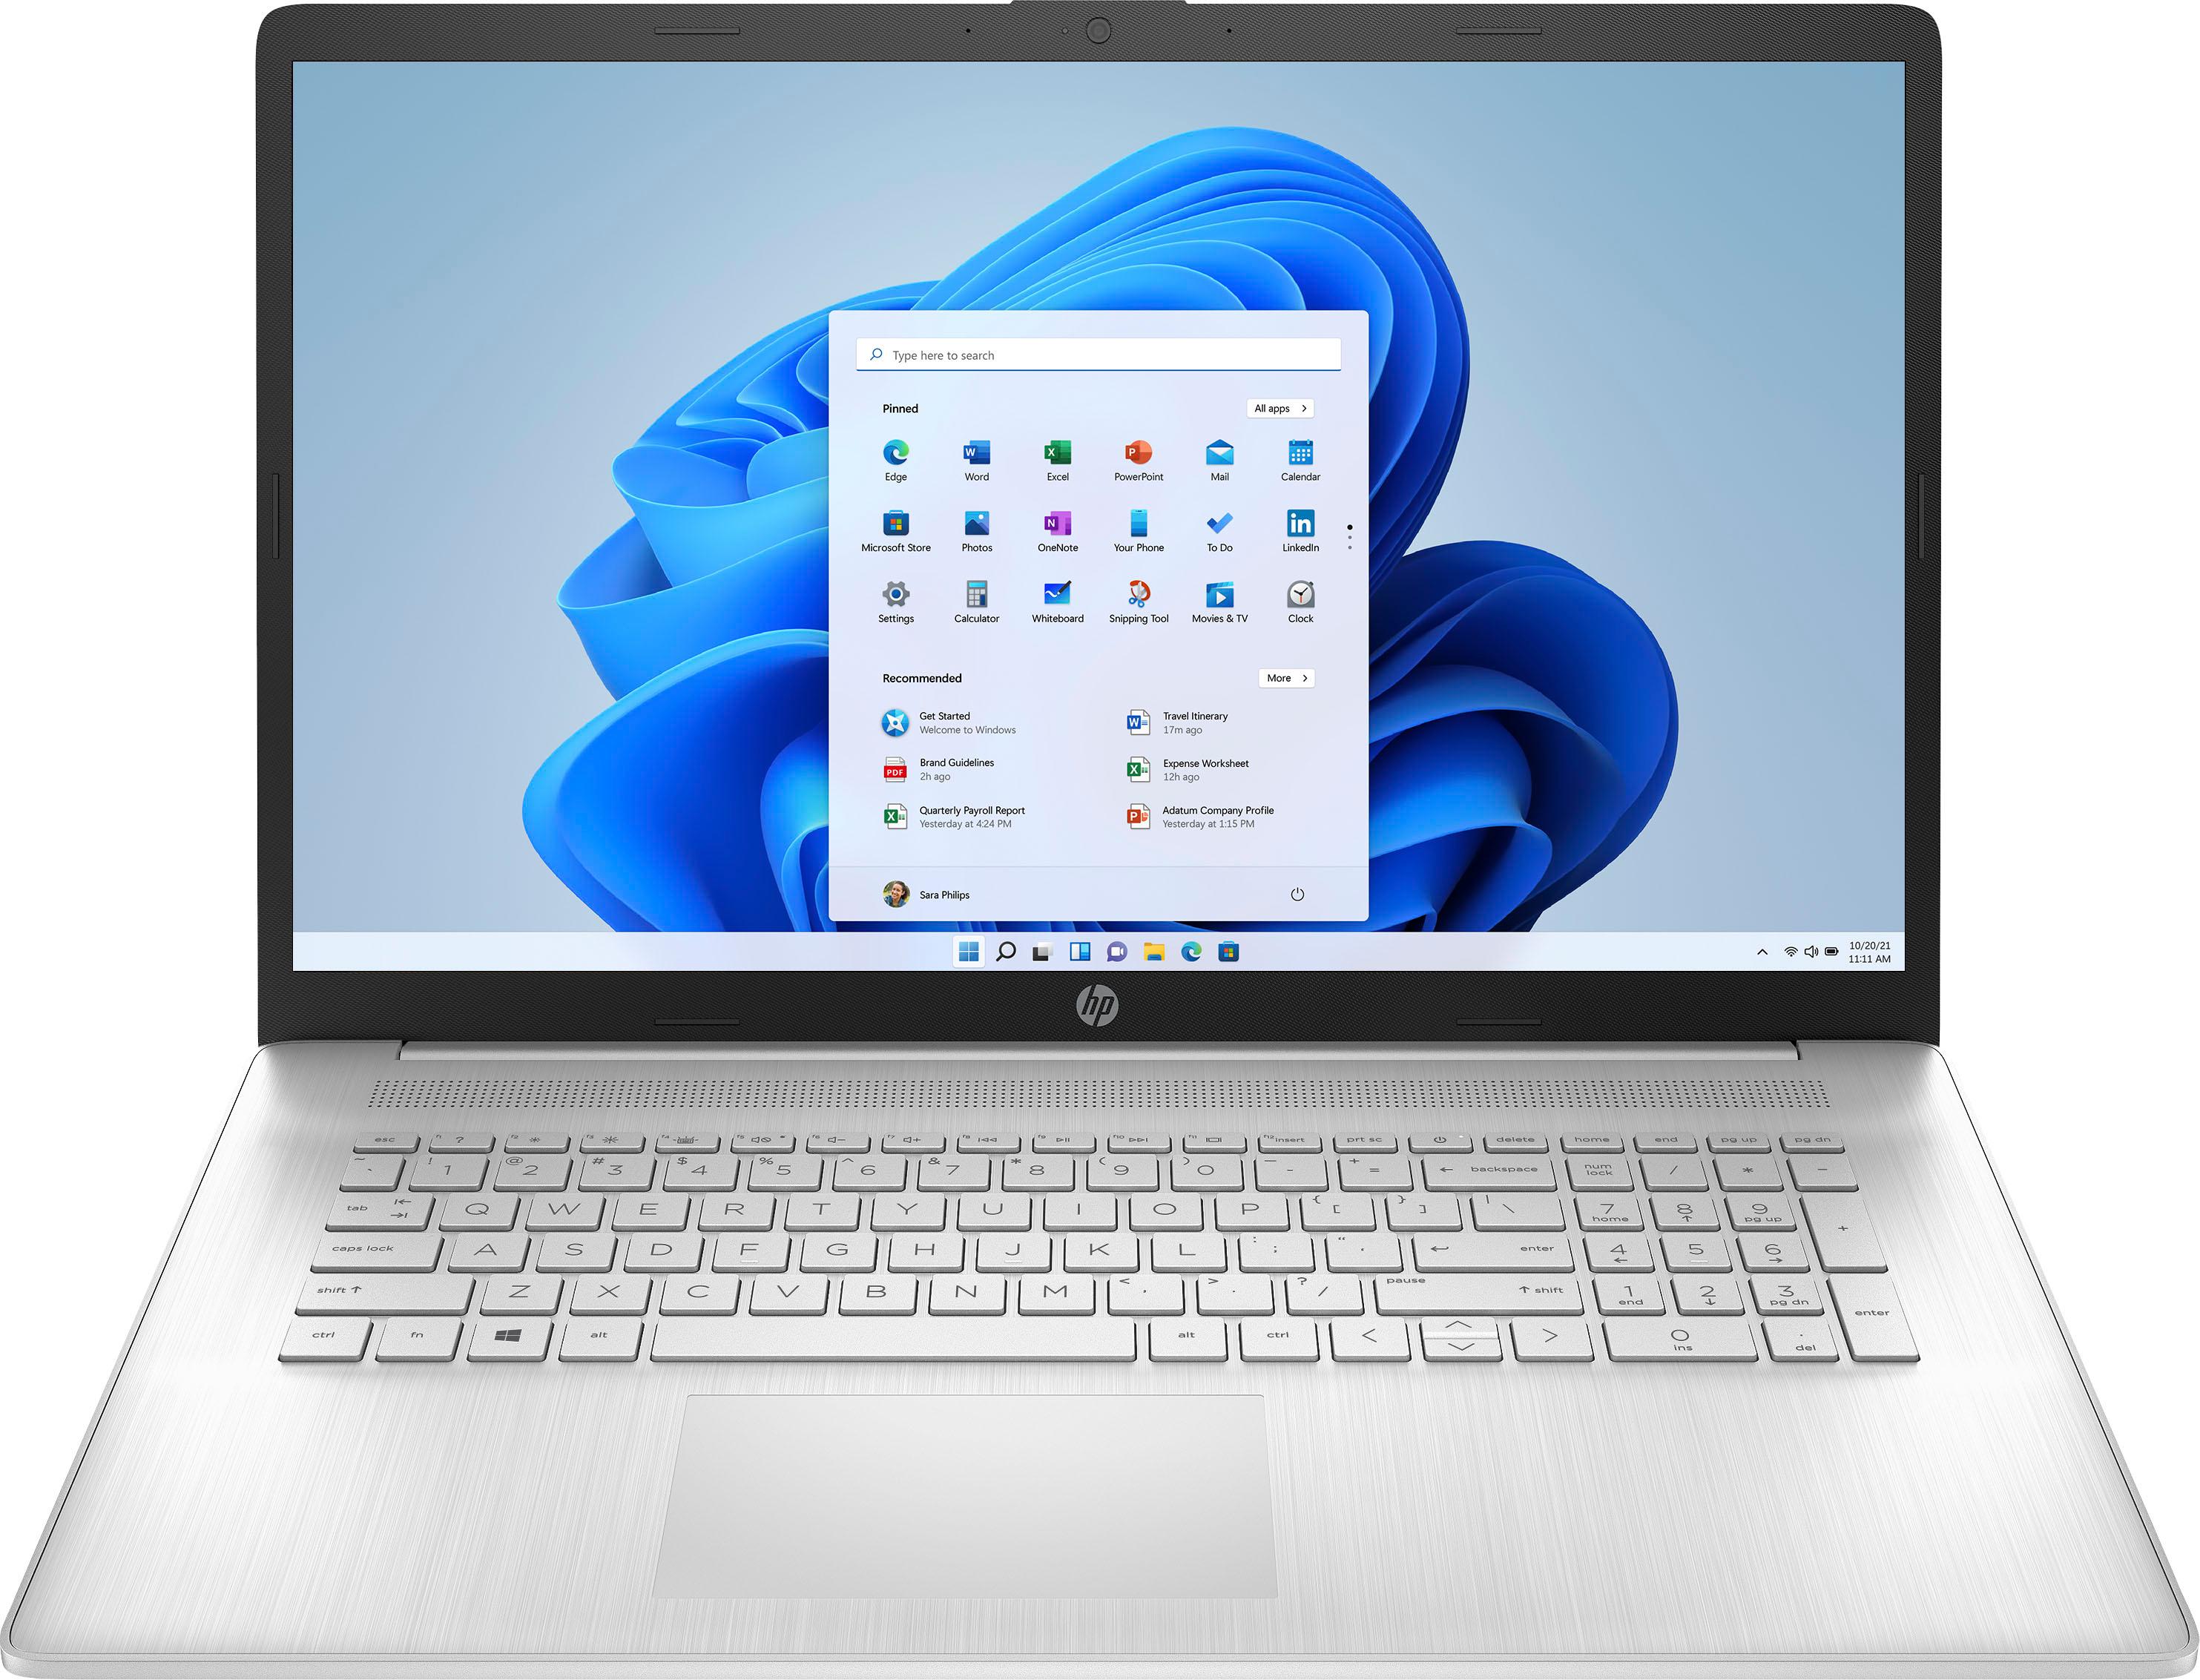 HP 17.3in i5 8GB 256GB Notebook Laptop for $399.99 Shipped